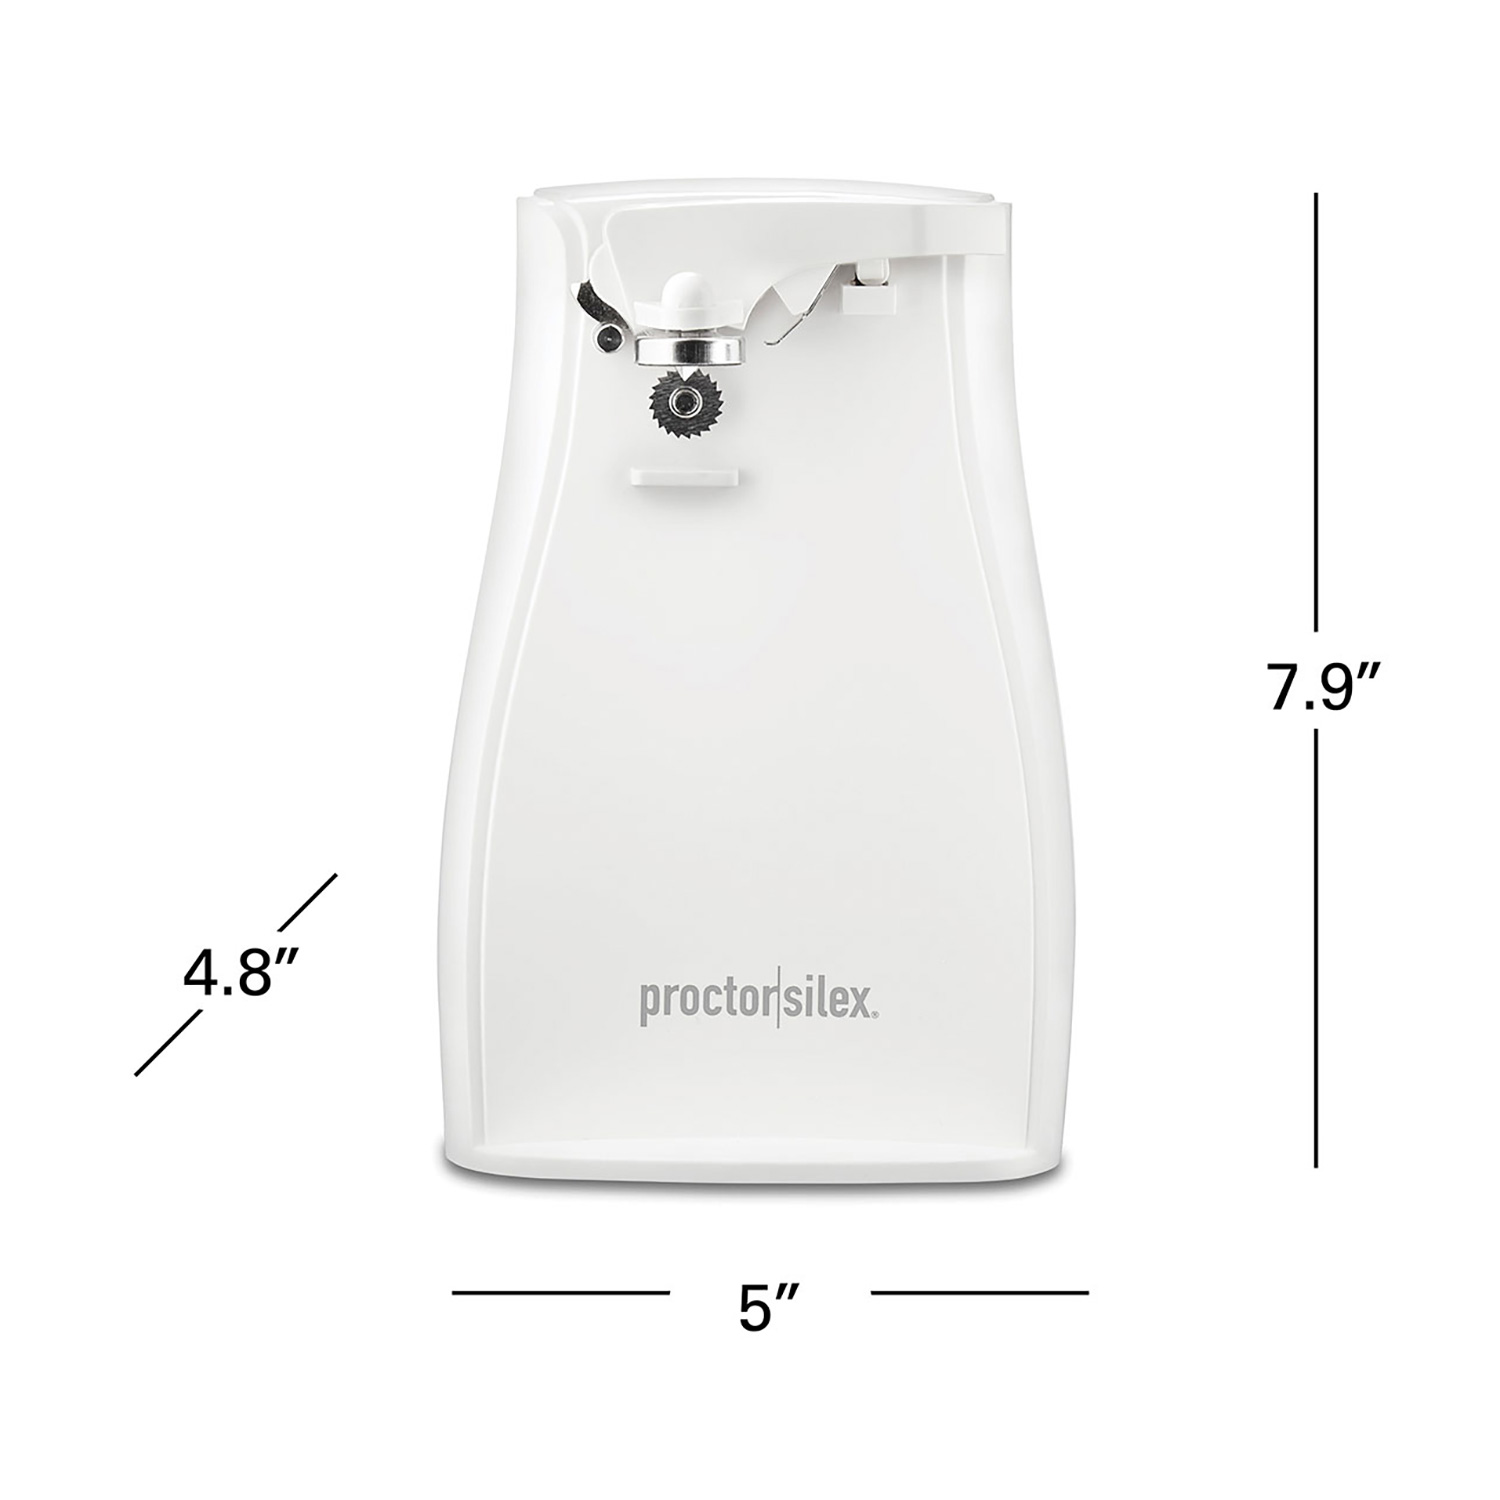 Proctor Silex Power Opener White Electric Can Opener - Dazey's Supply